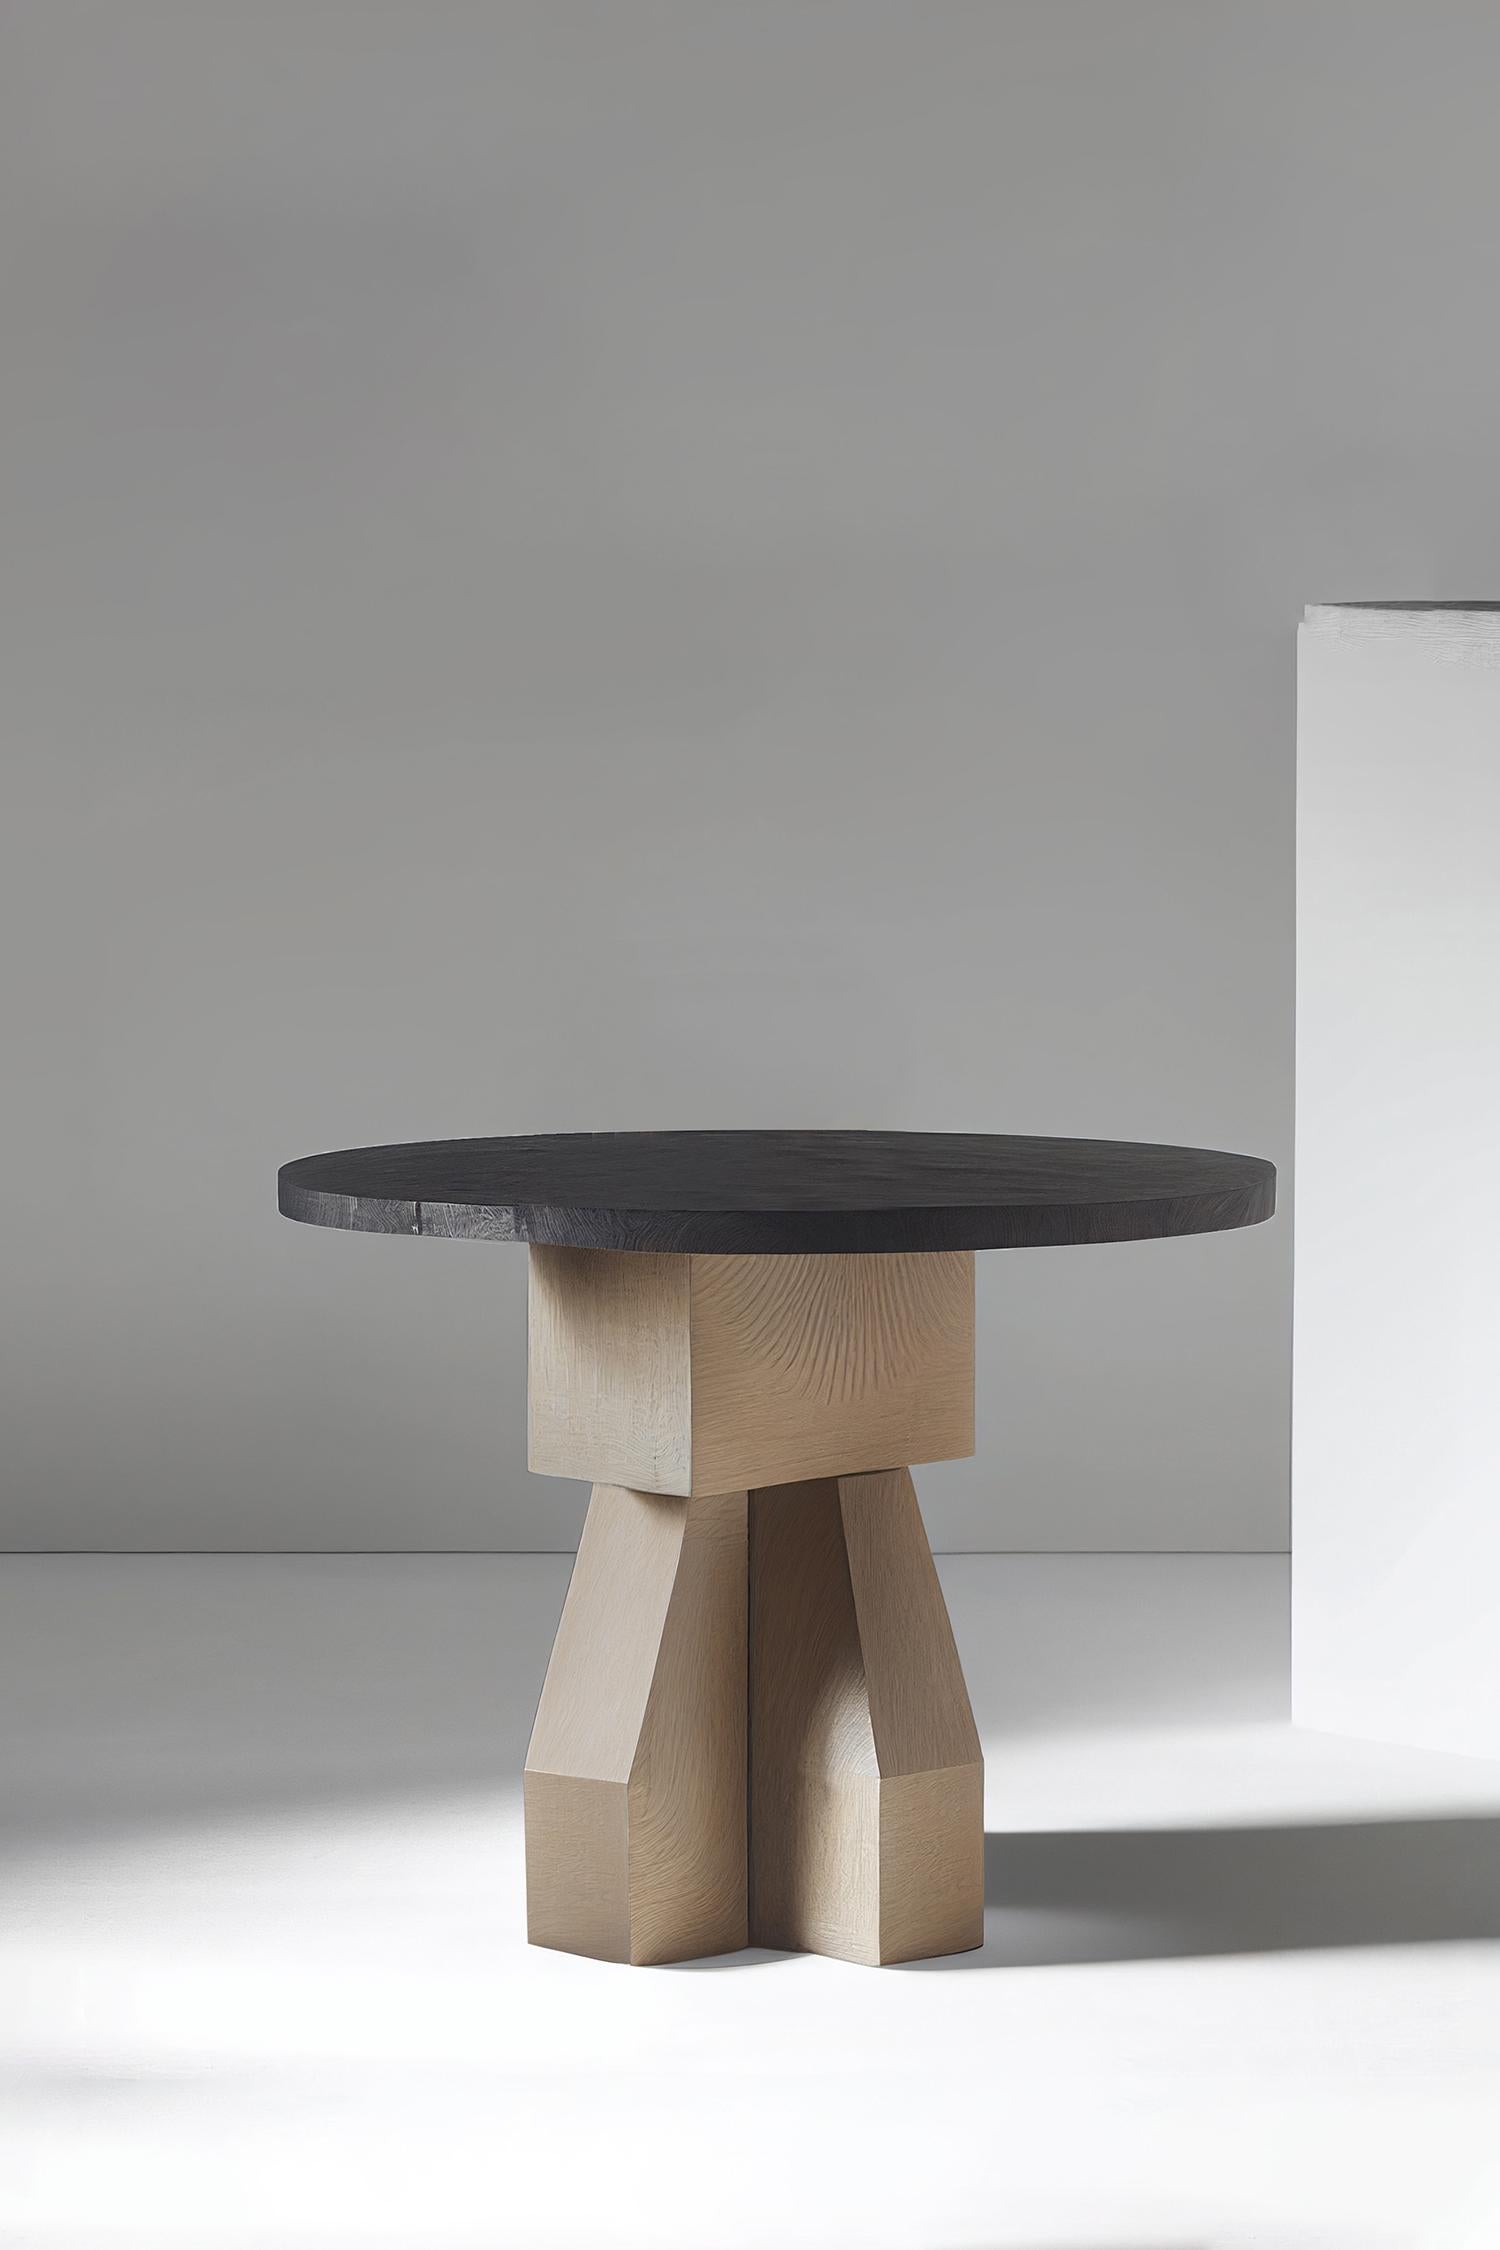 Hand-crafted solid thick wood side table with faceted base in gray tint and black round table top. 
Product made to order; some variances may apply to the final piece. 

——

NONO is a Mexican design brand with more than 10 years of experience